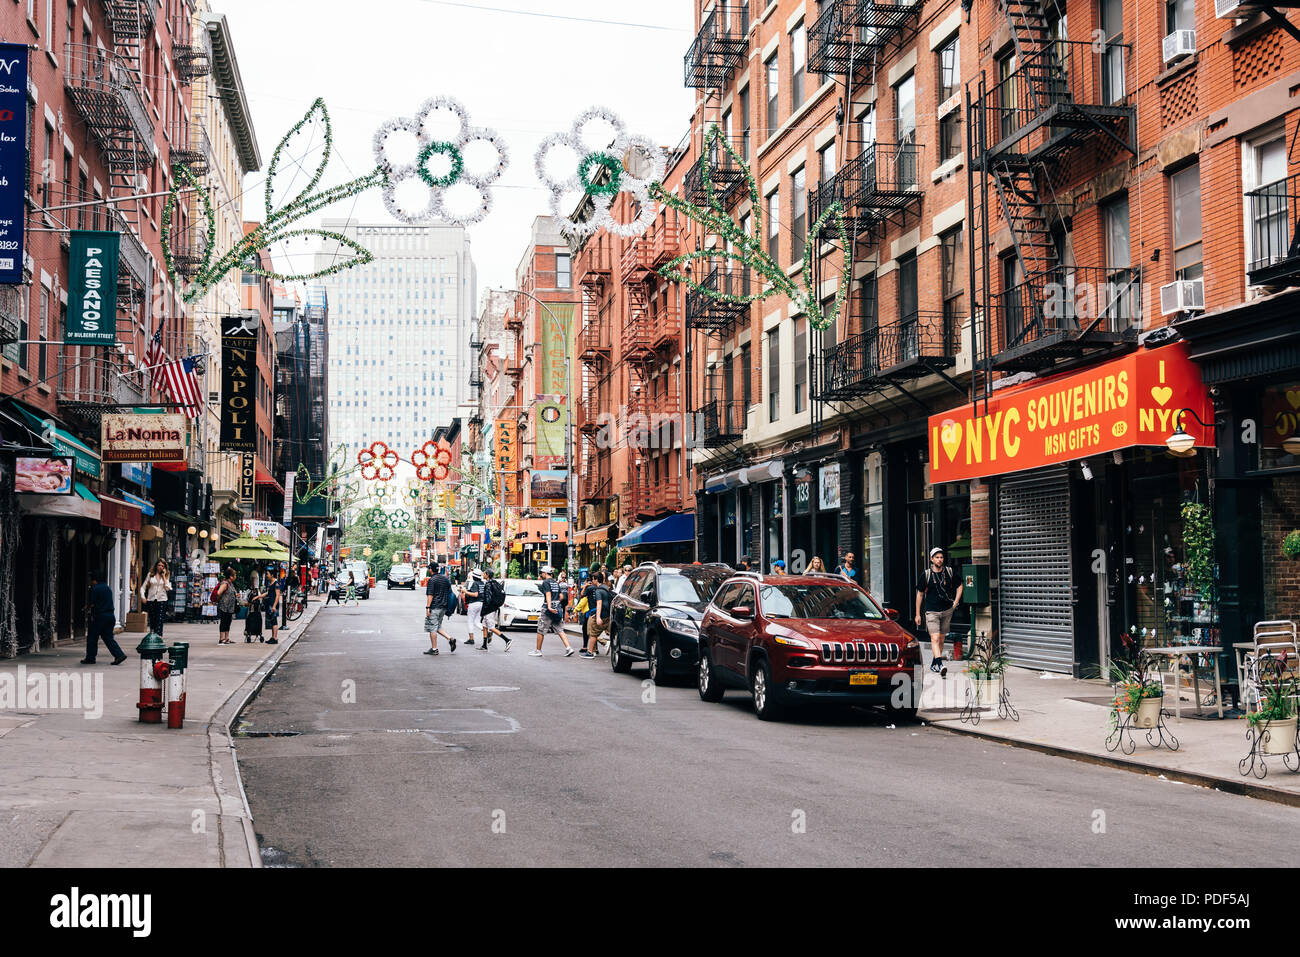 New York City, USA - June 20, 2018: Little Italy view in downtown of New York Stock Photo